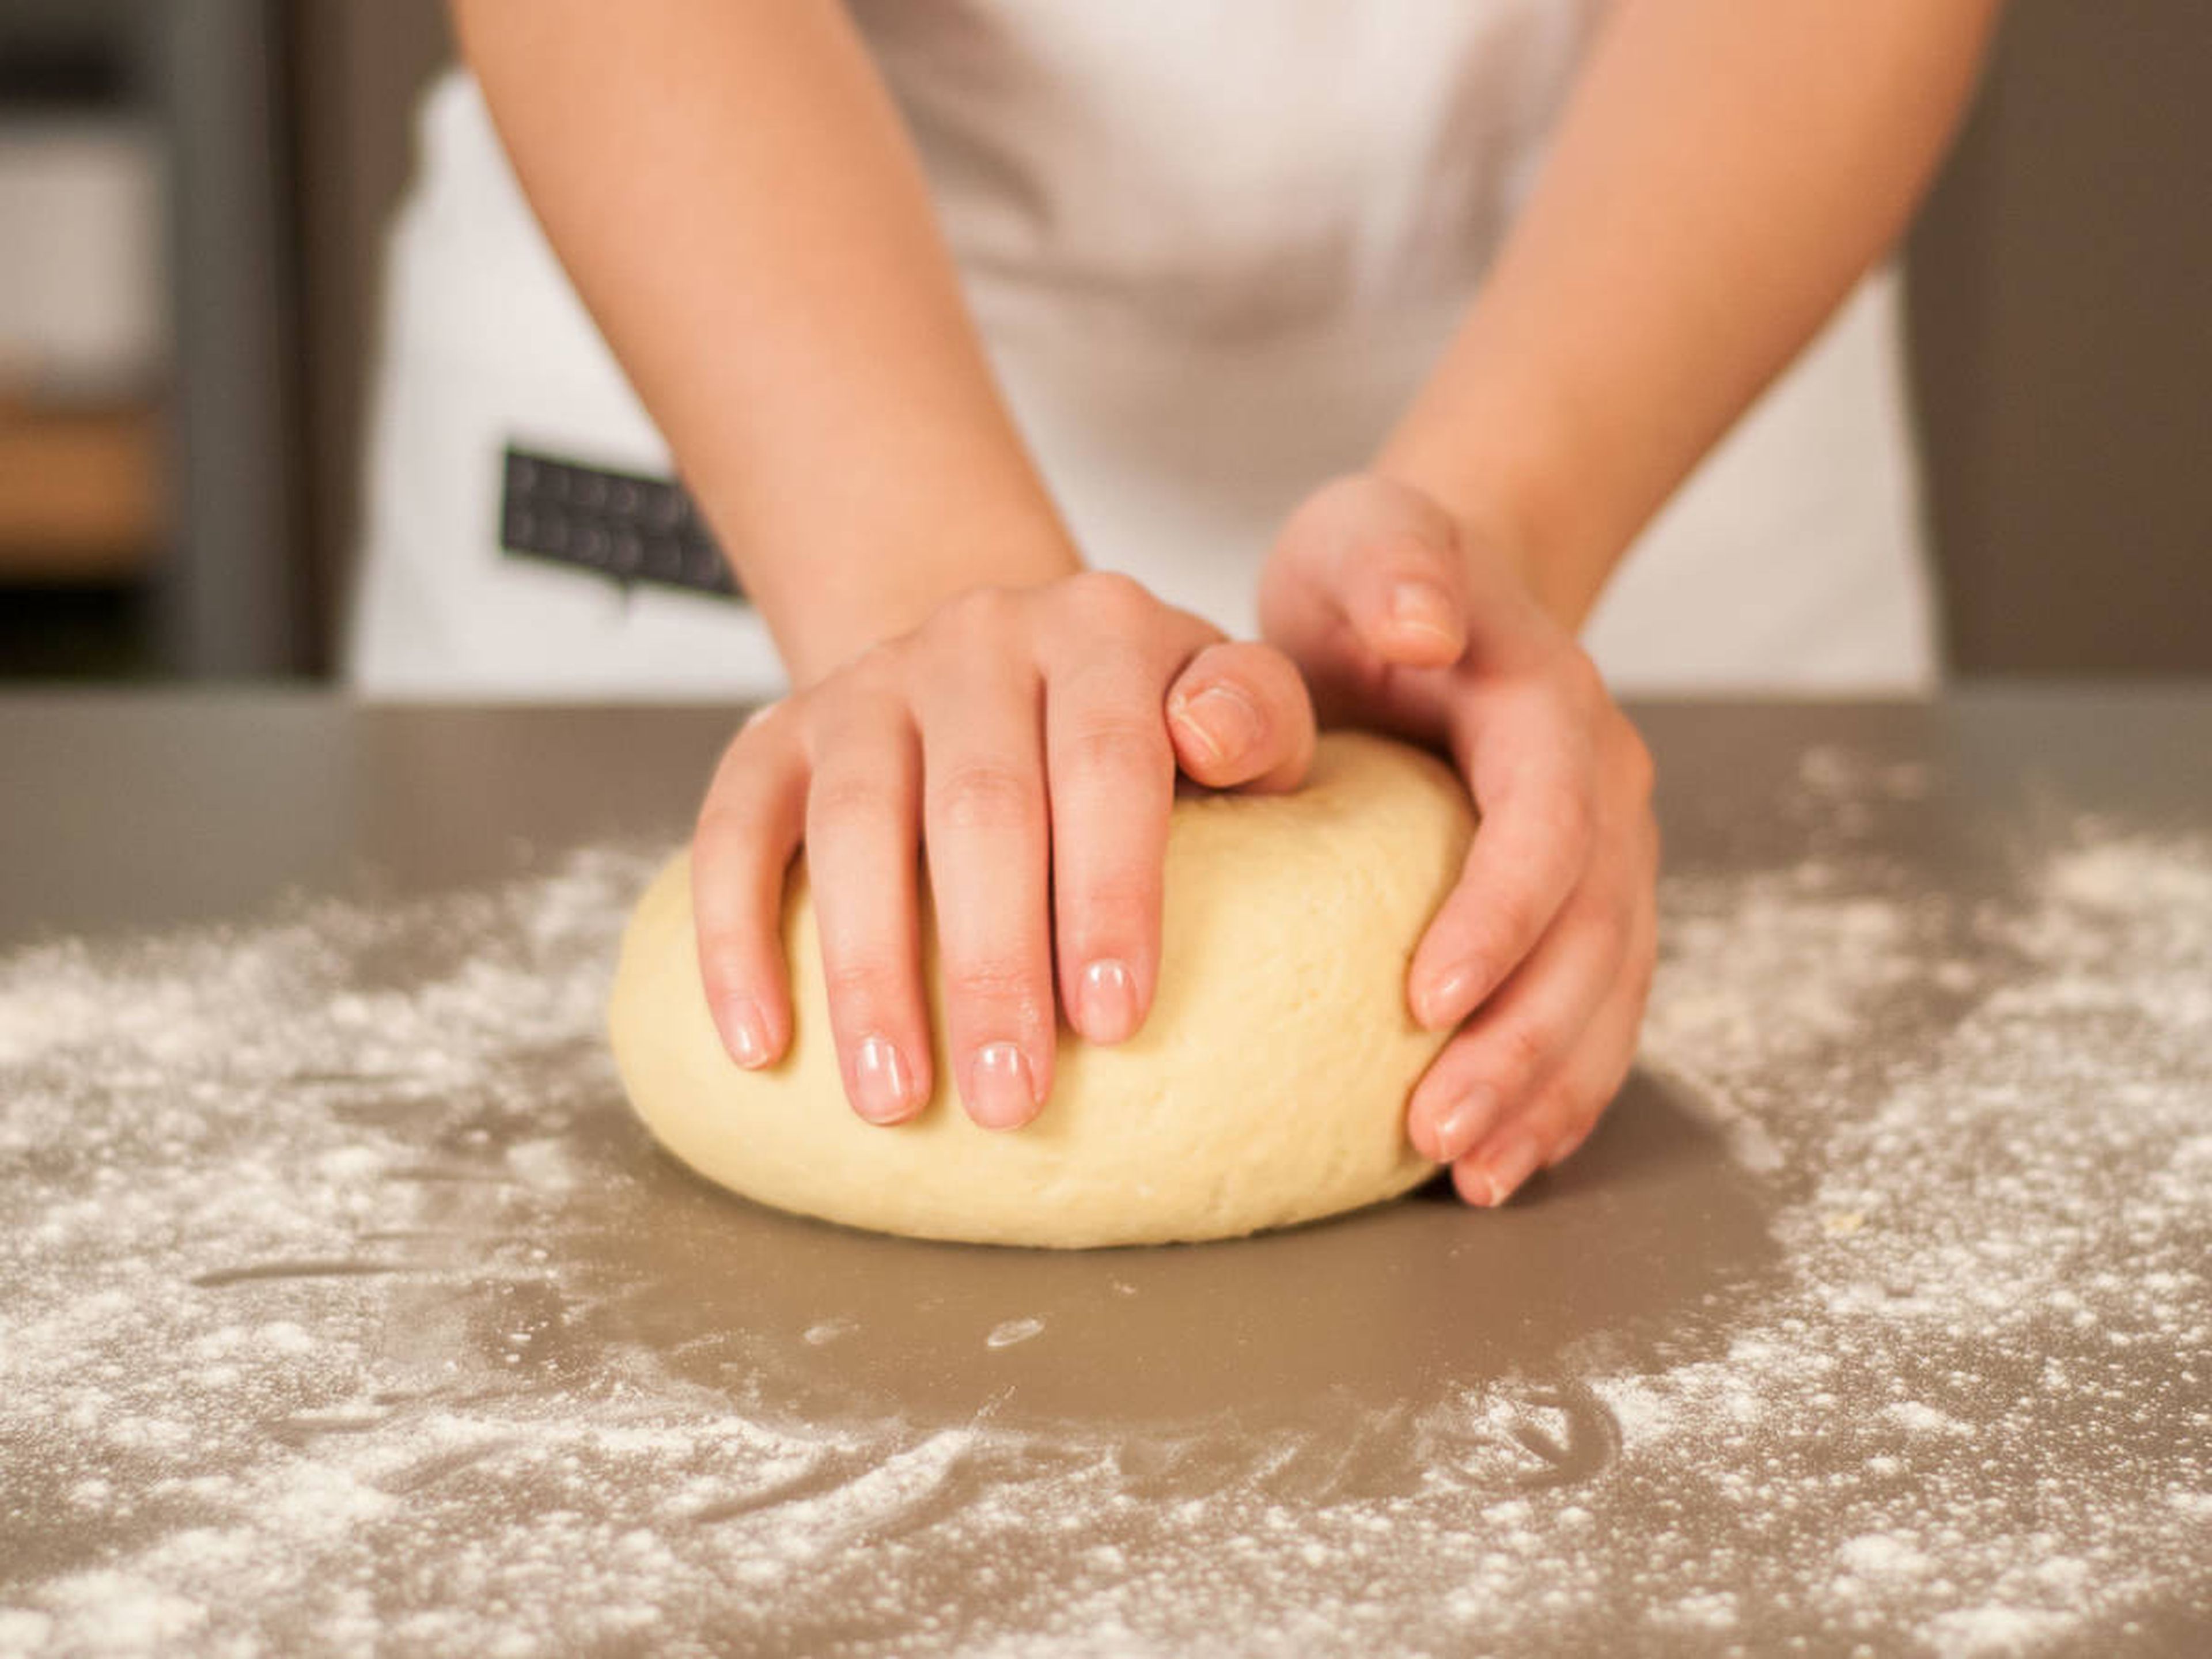 Transfer dough to a lightly floured surface and continue to knead by hand.